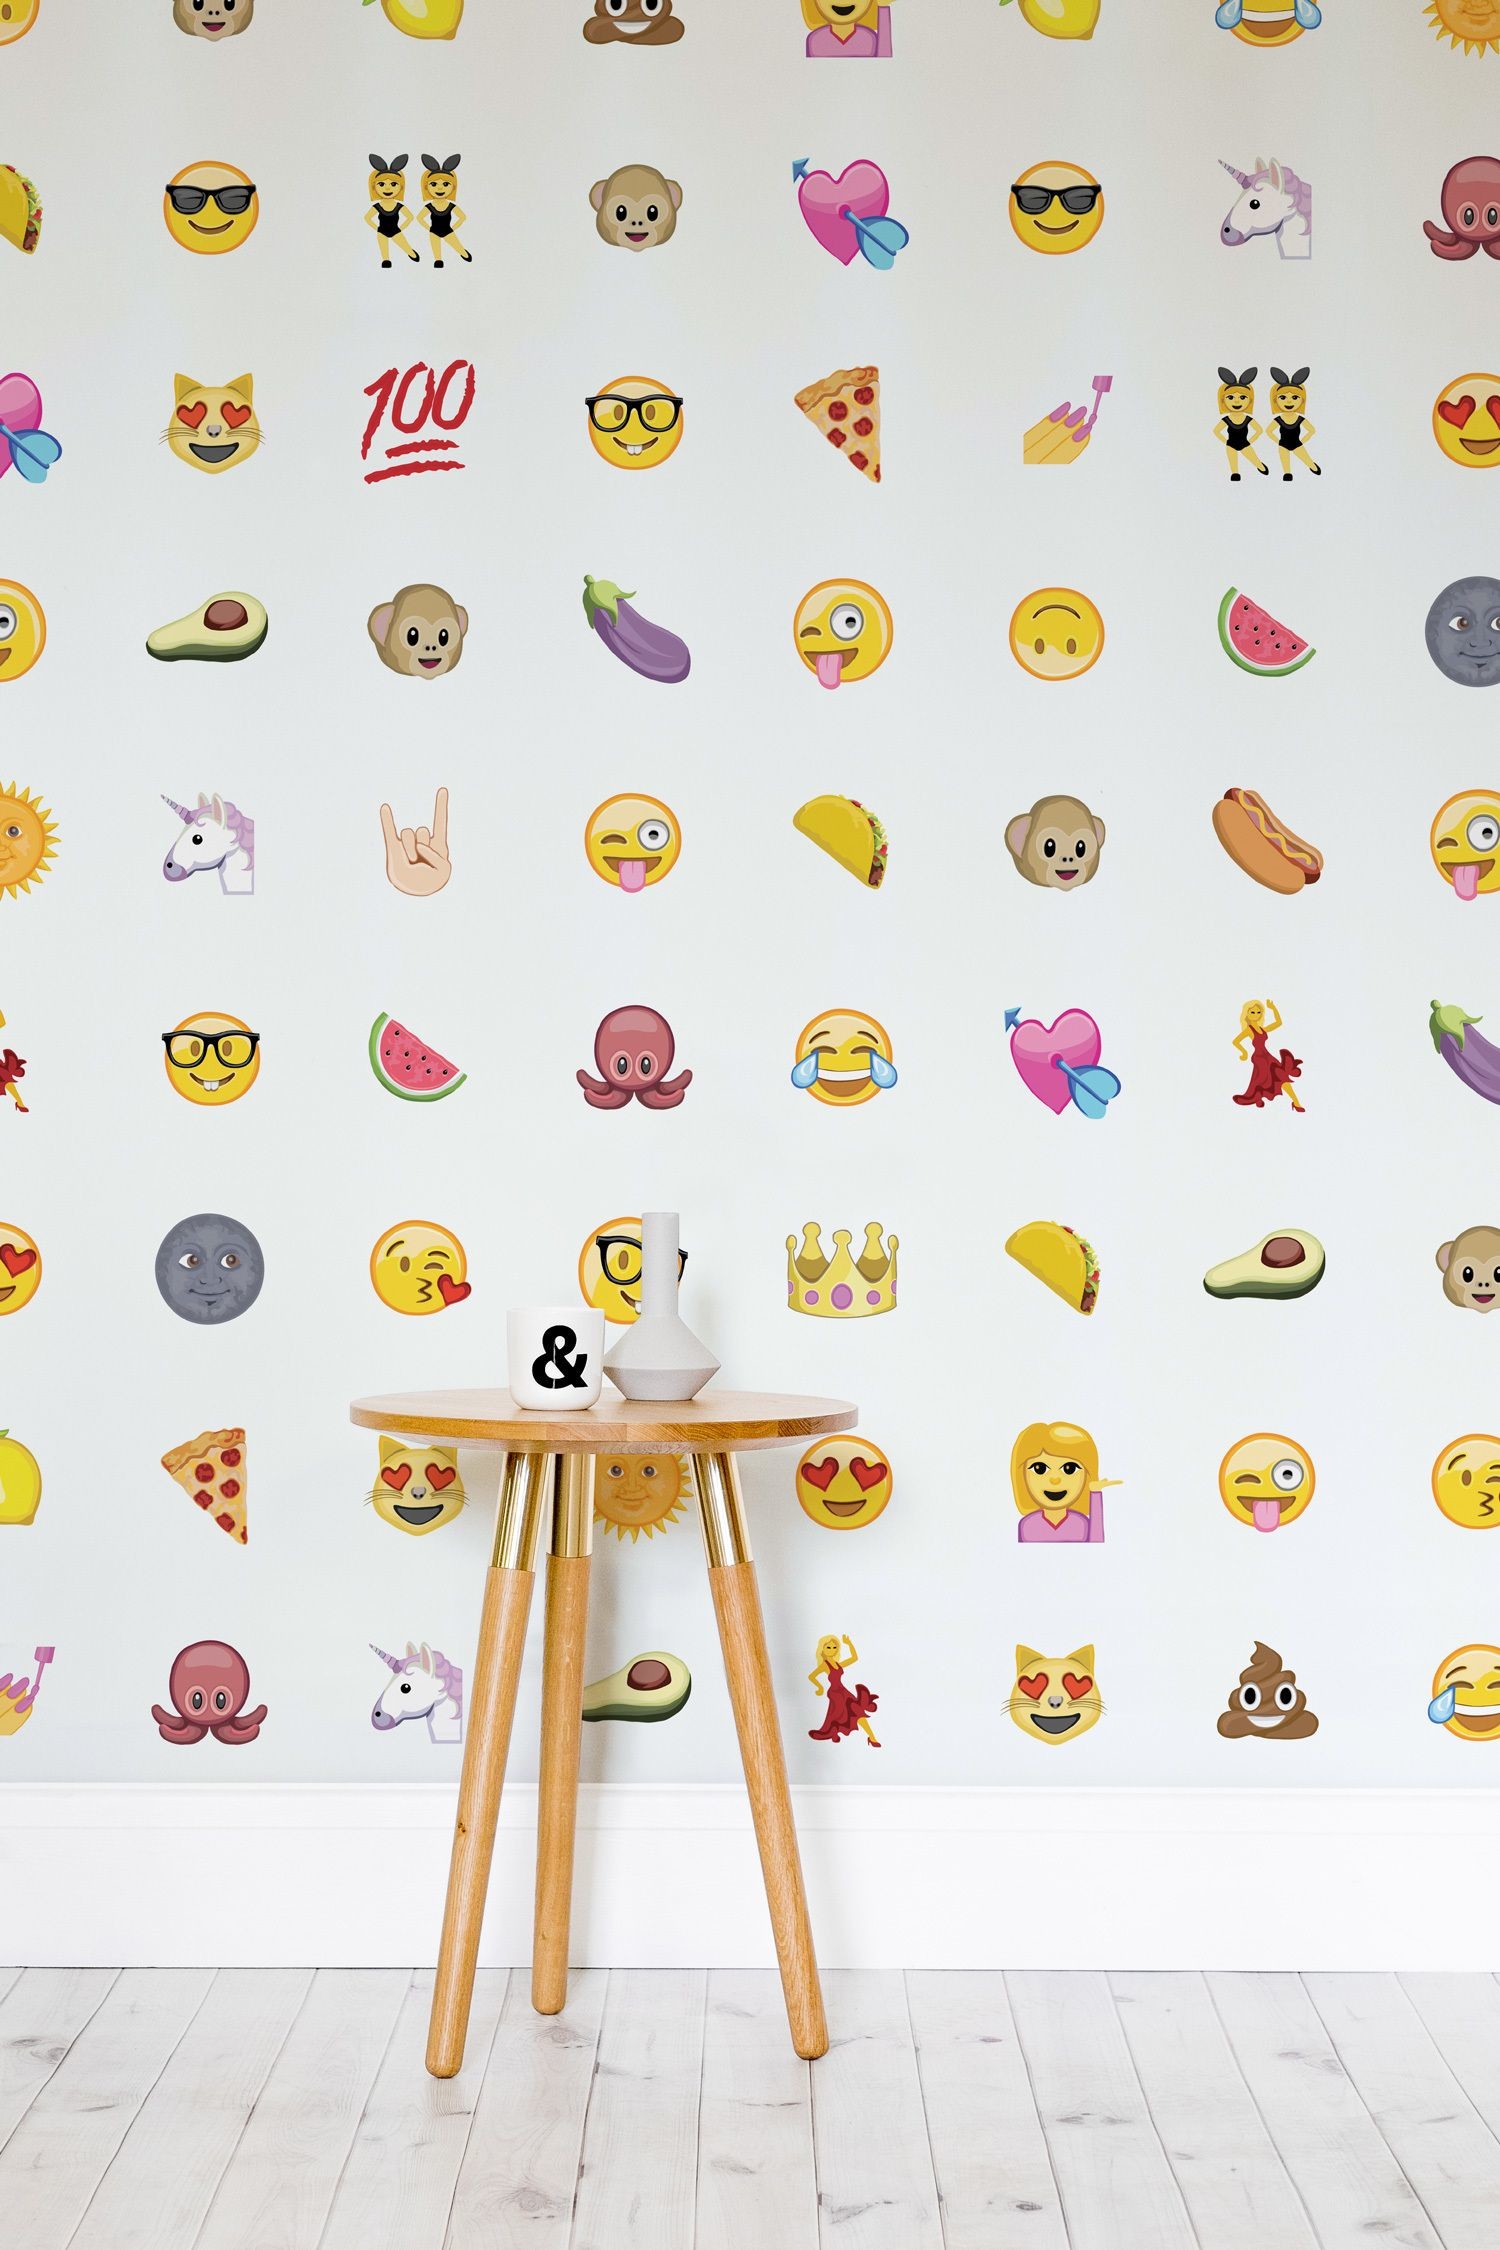 1500x2250 Express yourself with this Emoji wallpaper design! With a wonderful mix of  charming emoji characters, this design will bring an energetic feel to your  home.